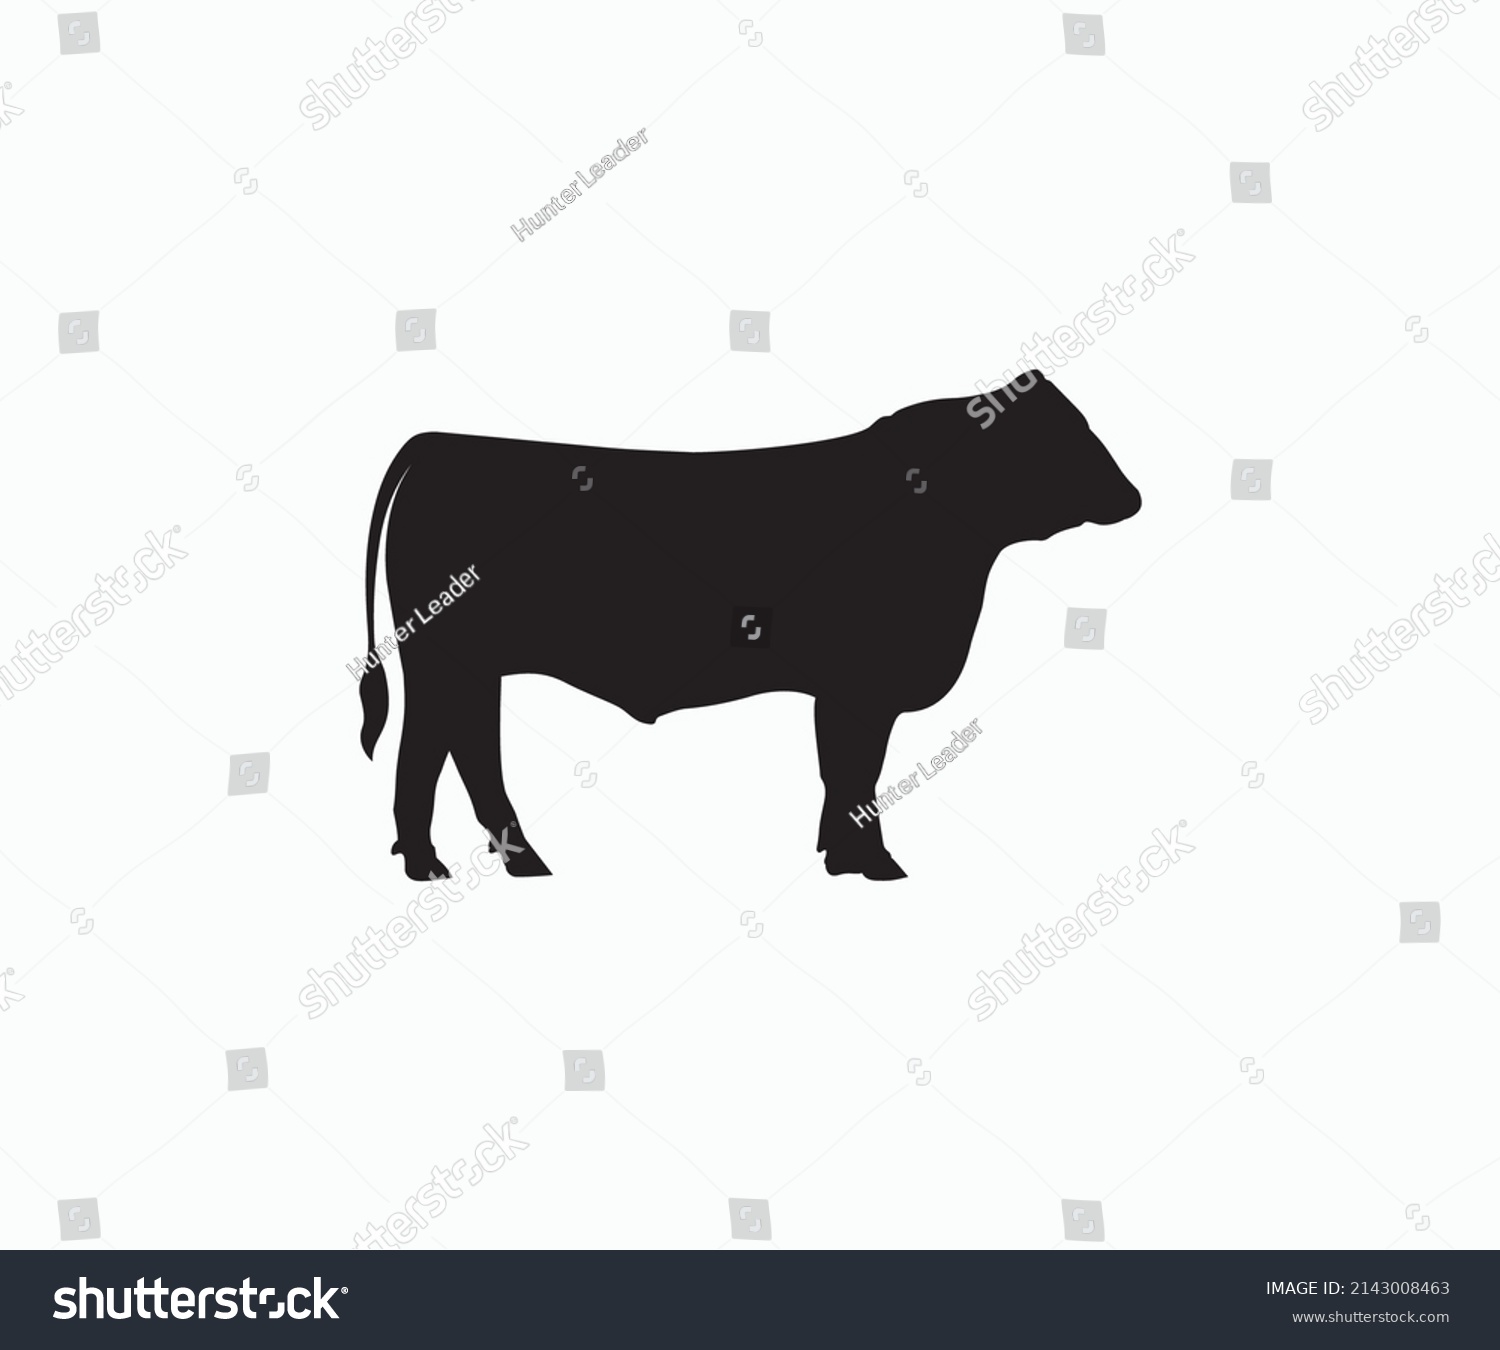 SVG of Angus Cow Silhouette Vector. Angus, Decree, Cattle, Cows, Bull, Cow, Intimidate, Art, Artwork, Painting, Silhouette. svg